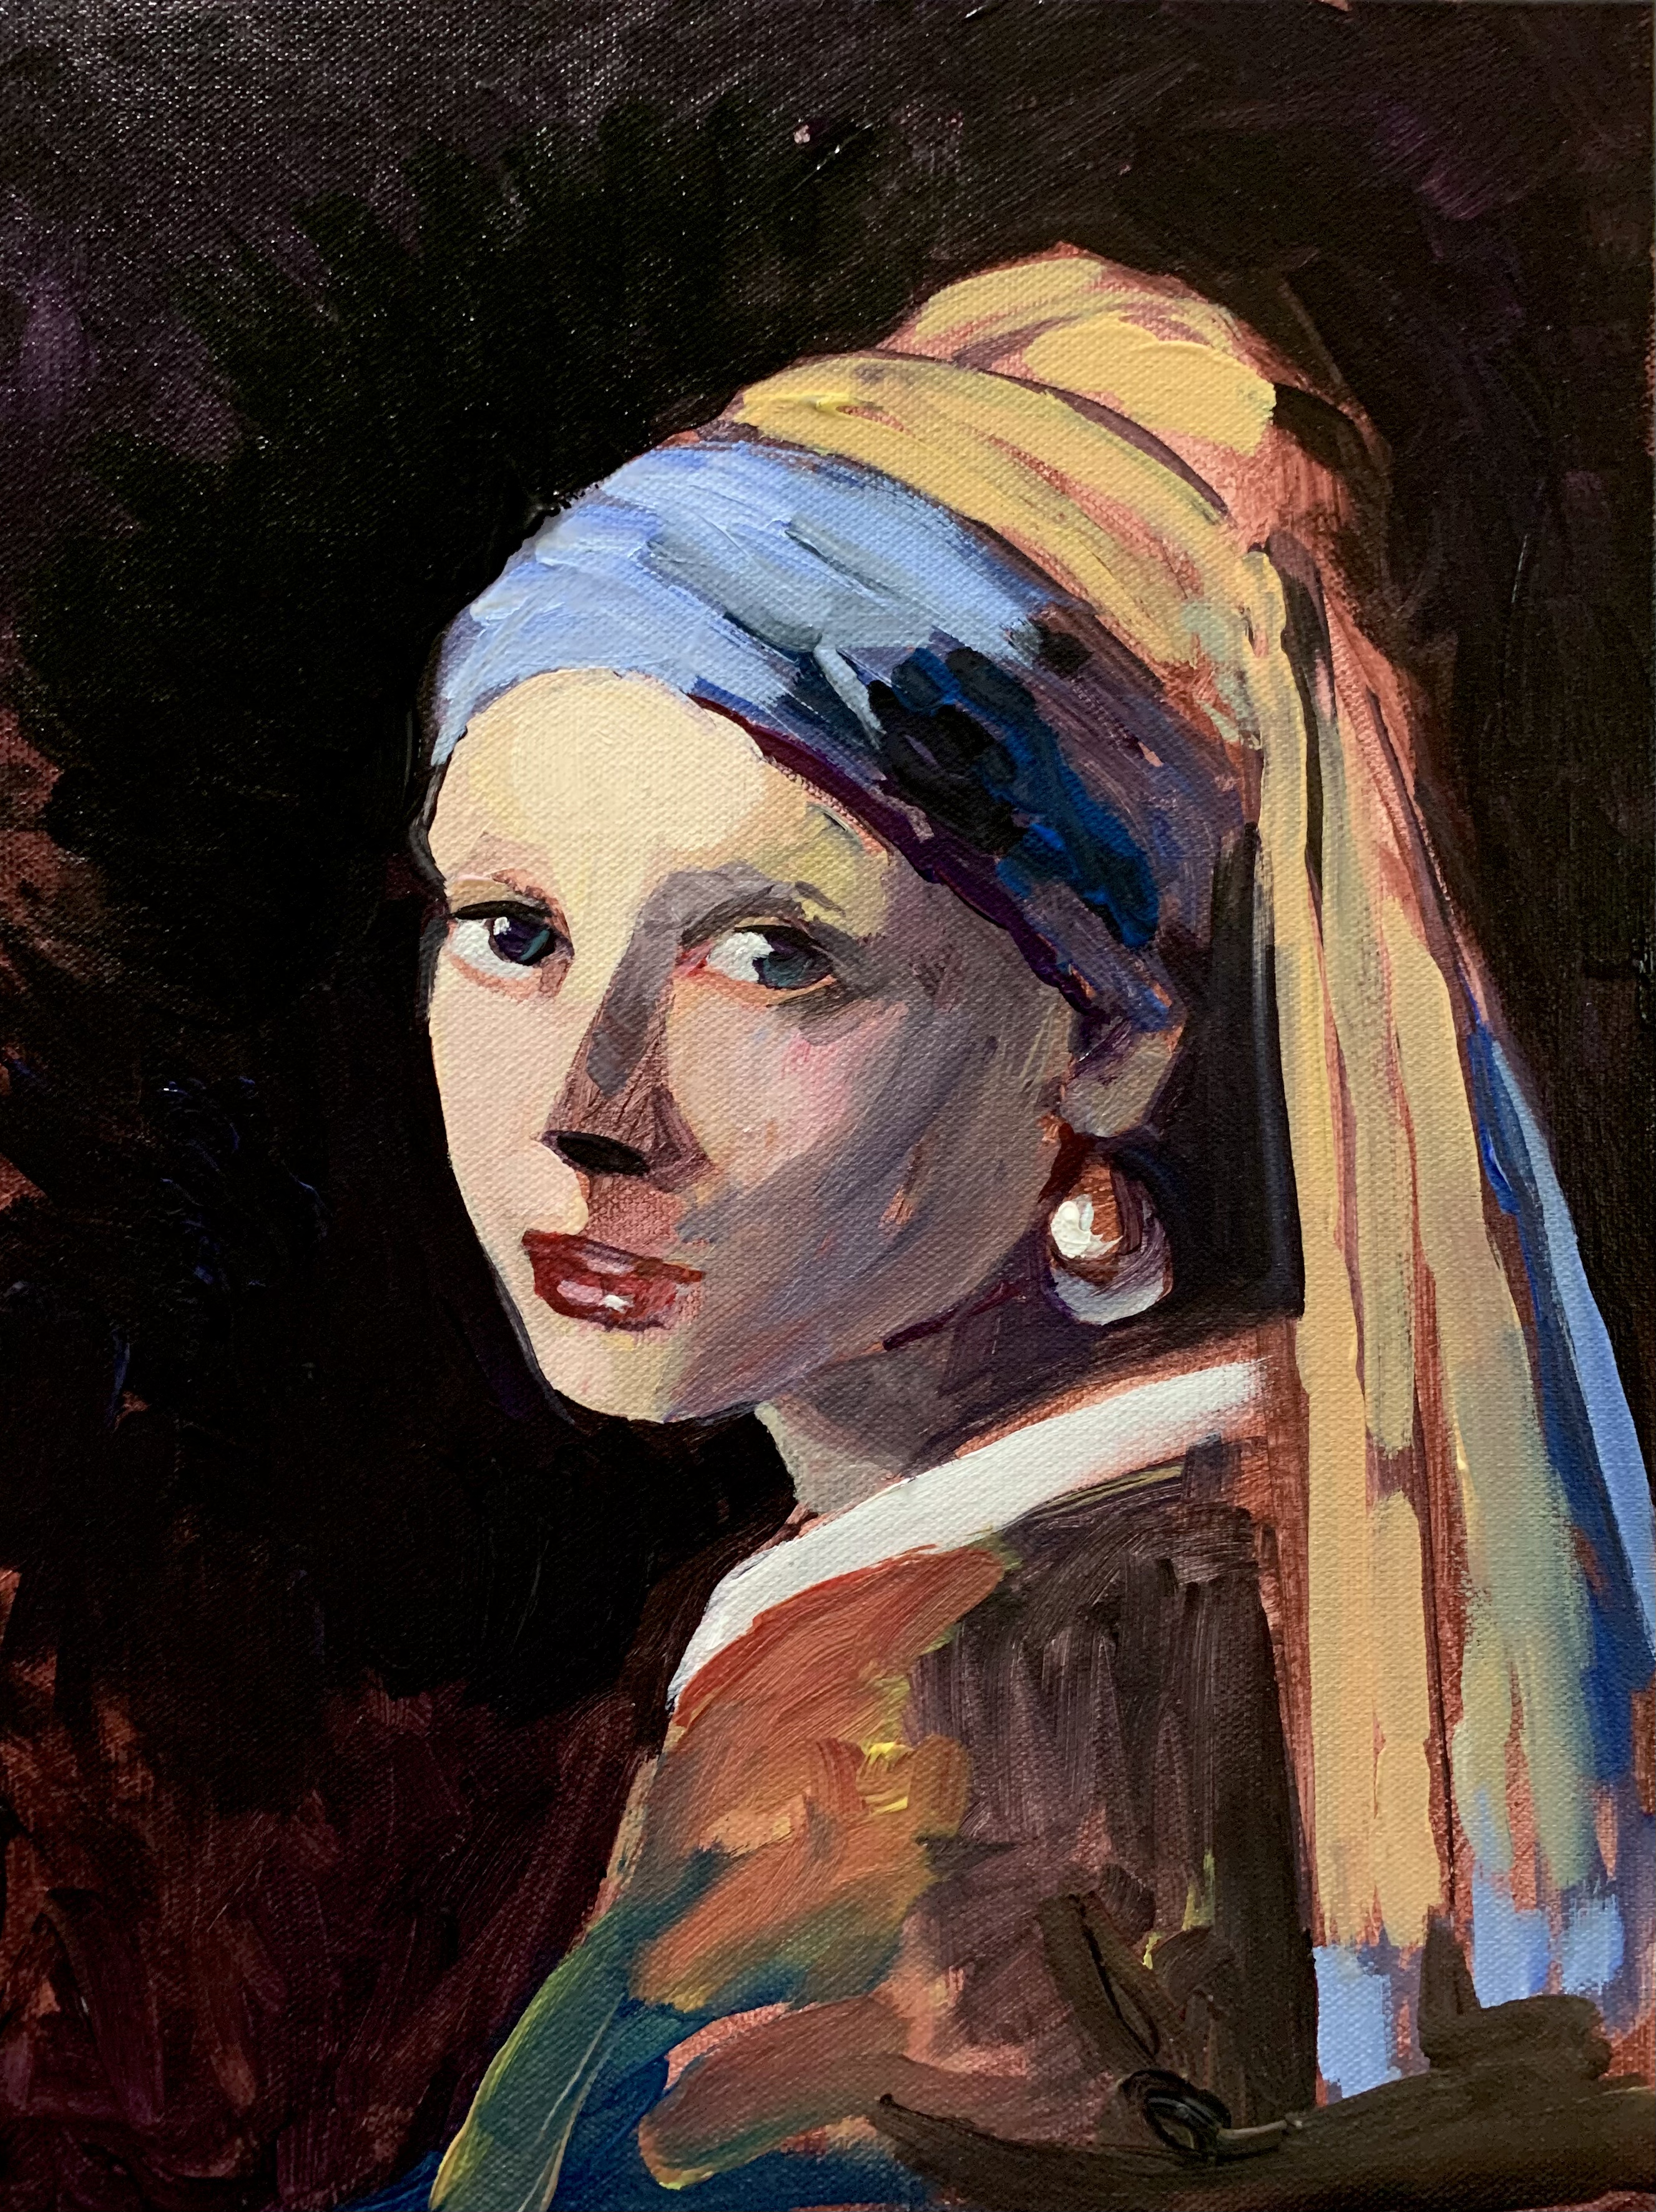 A Johannes Vermeer  Girl with a Pearl Earring experience project by Yaymaker